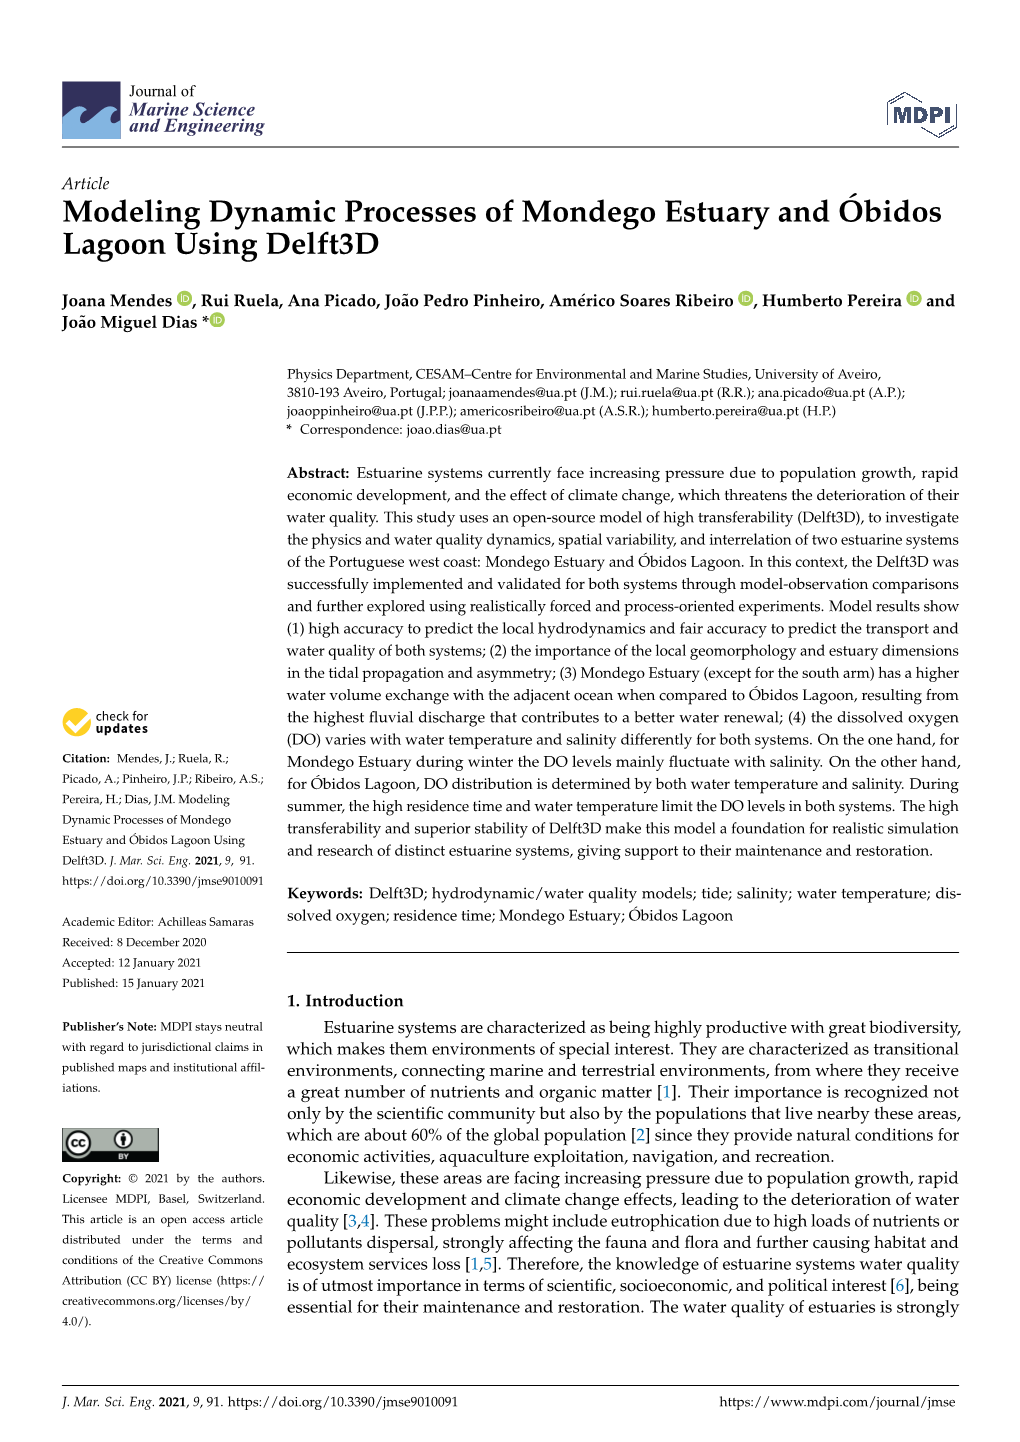 Modeling Dynamic Processes of Mondego Estuary and Óbidos Lagoon Using Delft3d